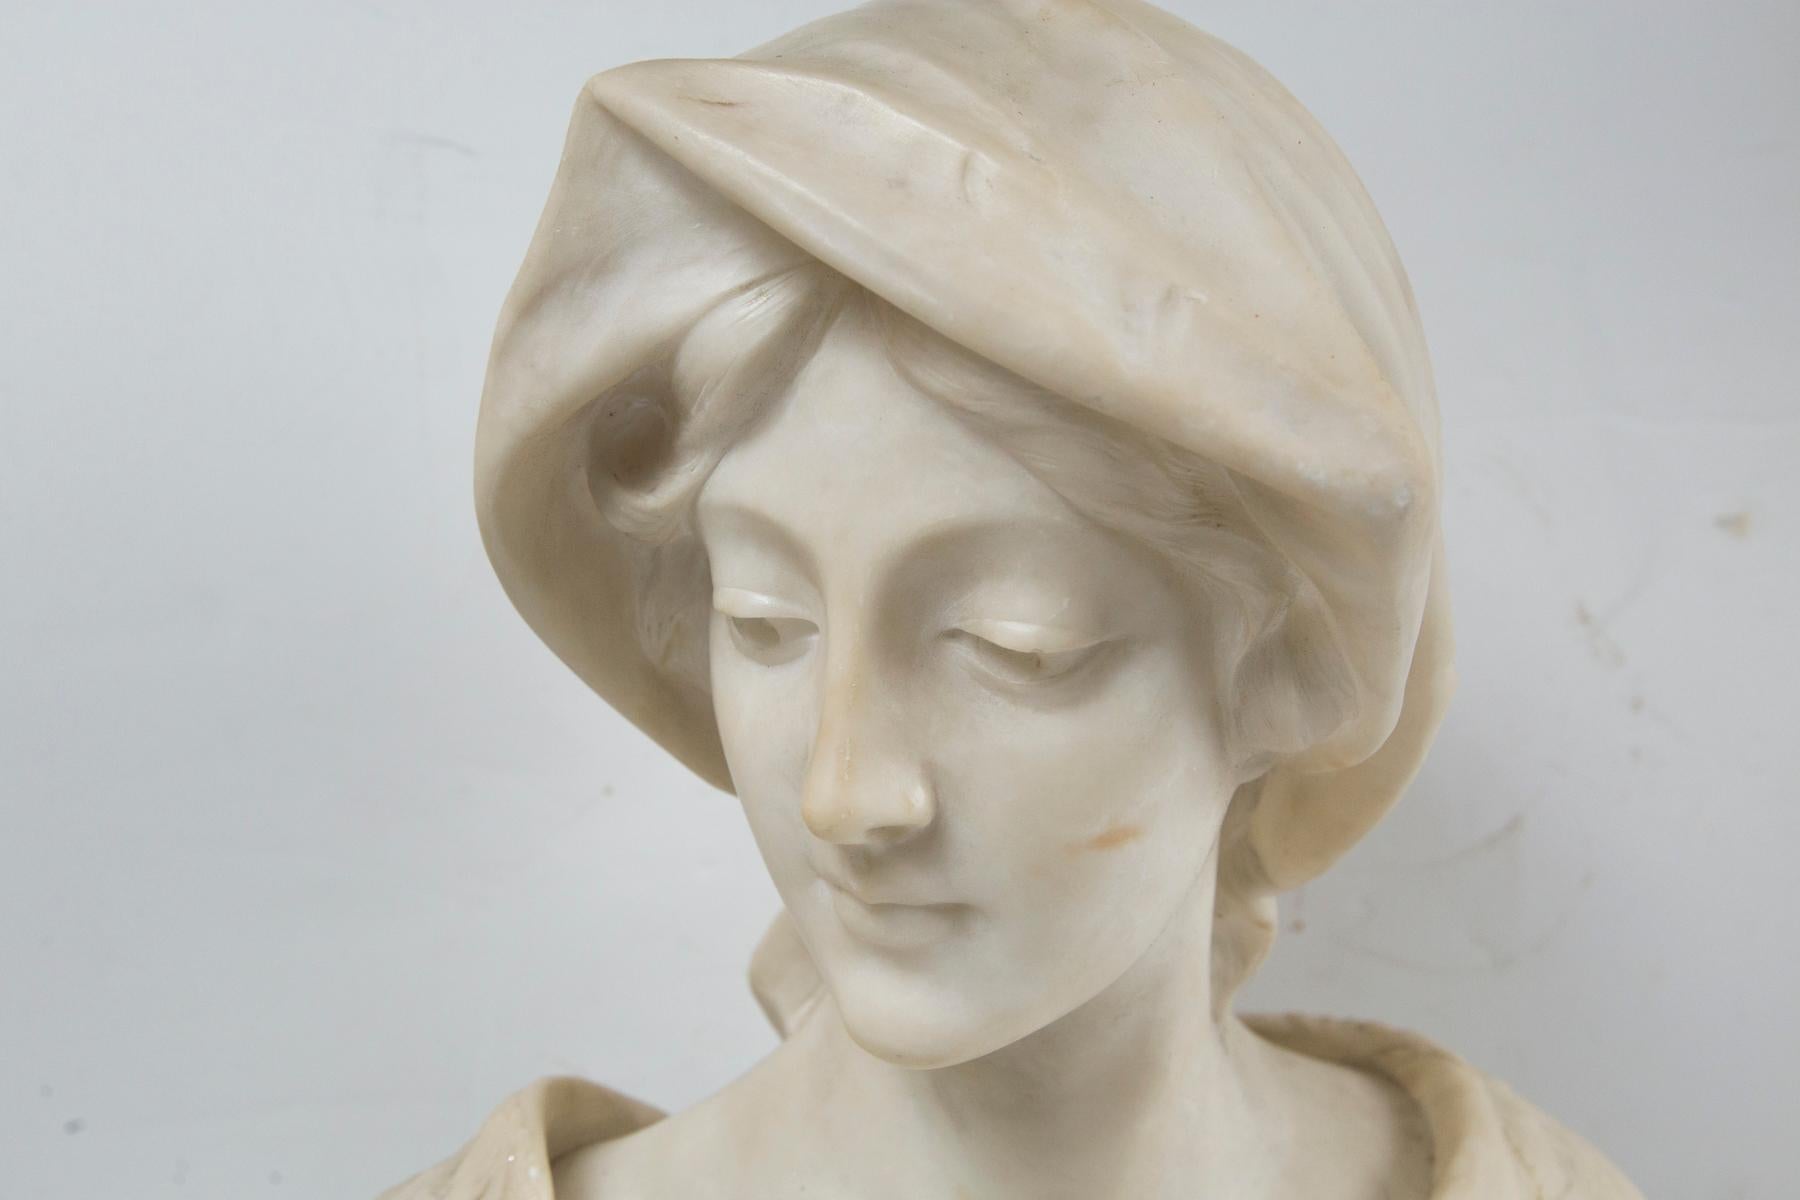 bust of a young woman